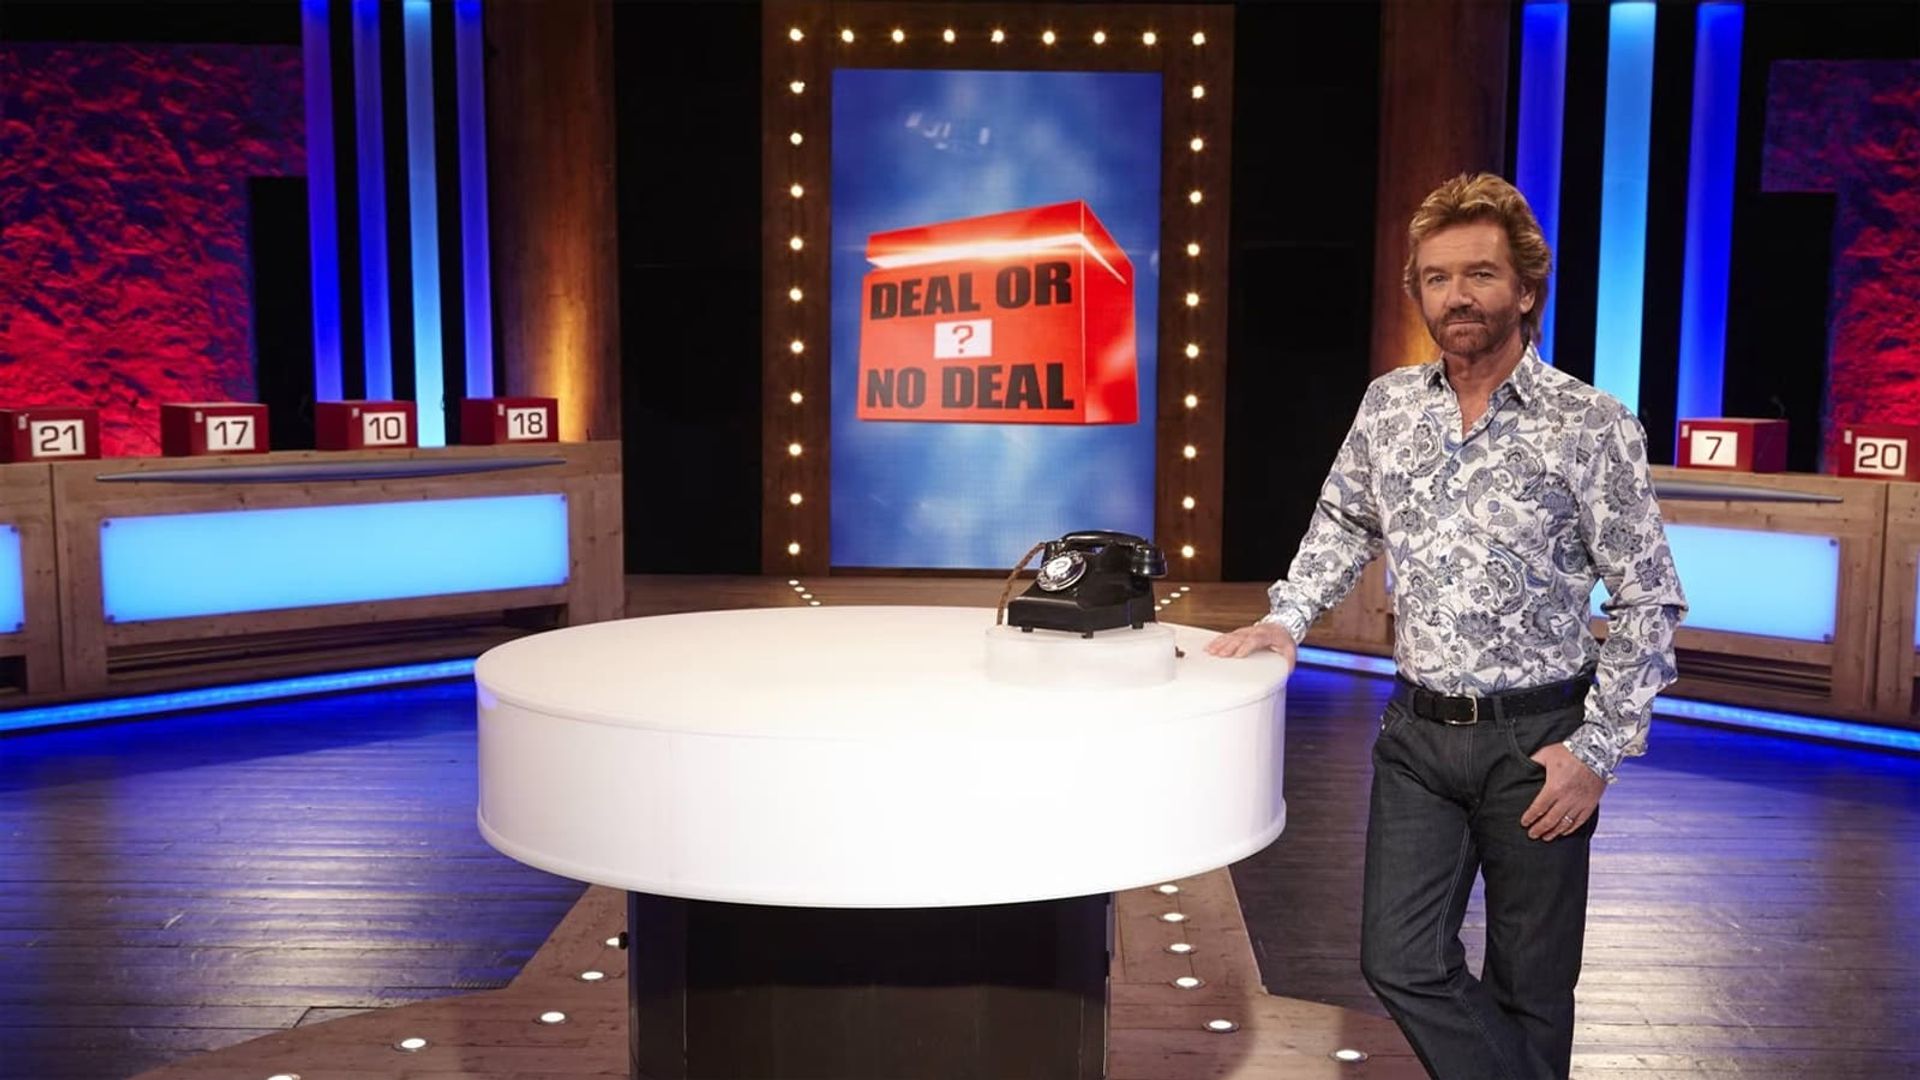 Deal or No Deal? background